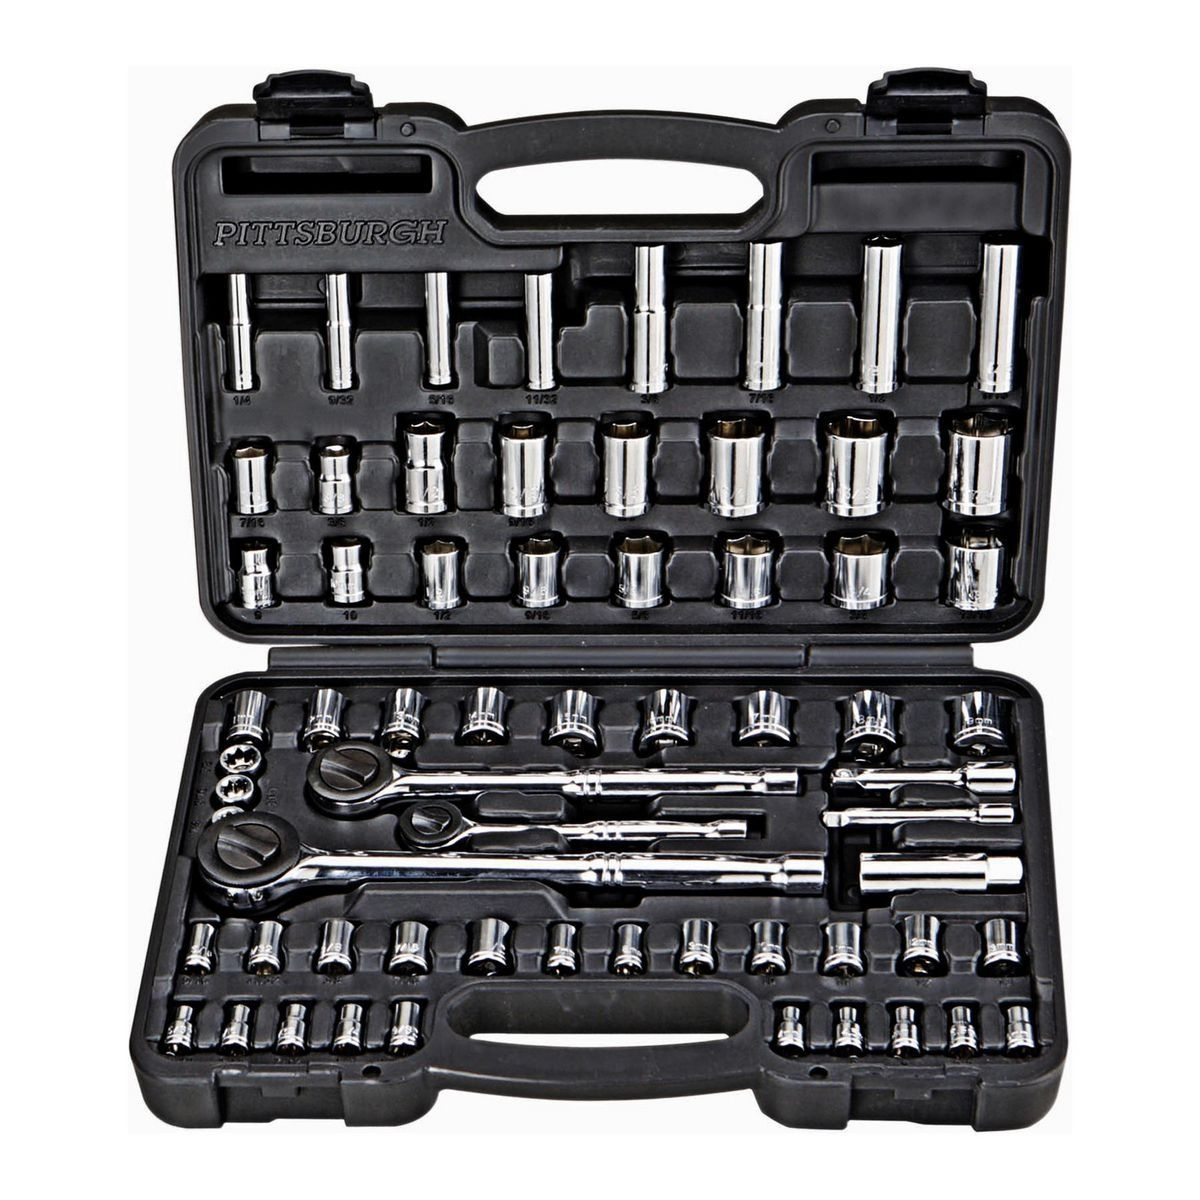  product image of Pittsburgh 64 pc Socket Set sold at Harbor Freight